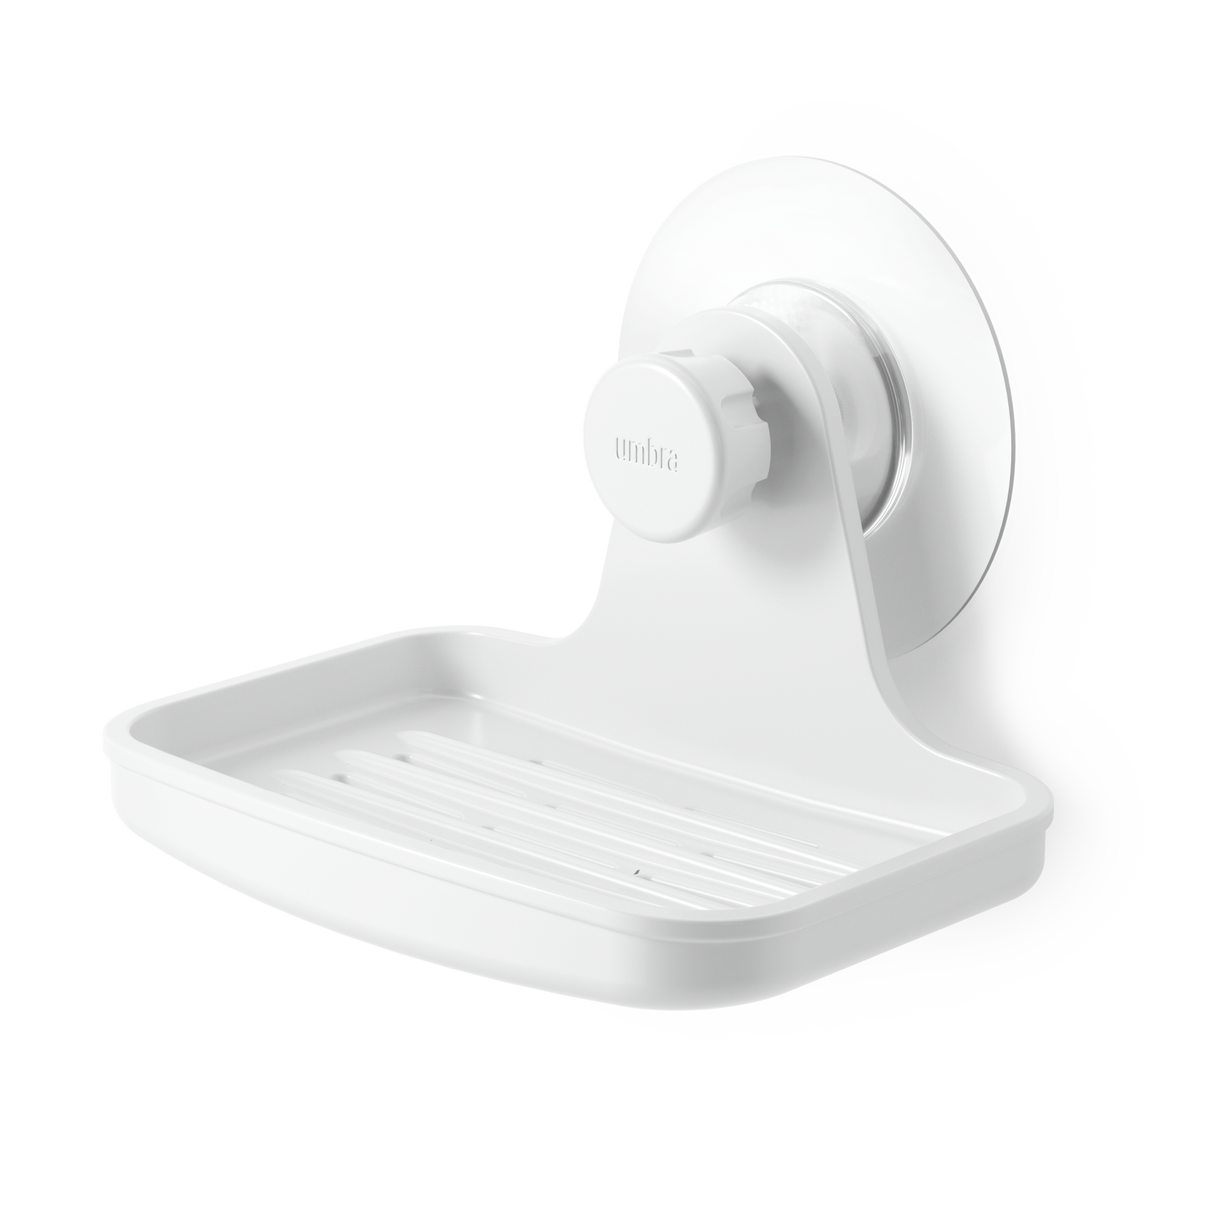 Flex Adhesive Soap Dish - For Shower, Umbra in 2023